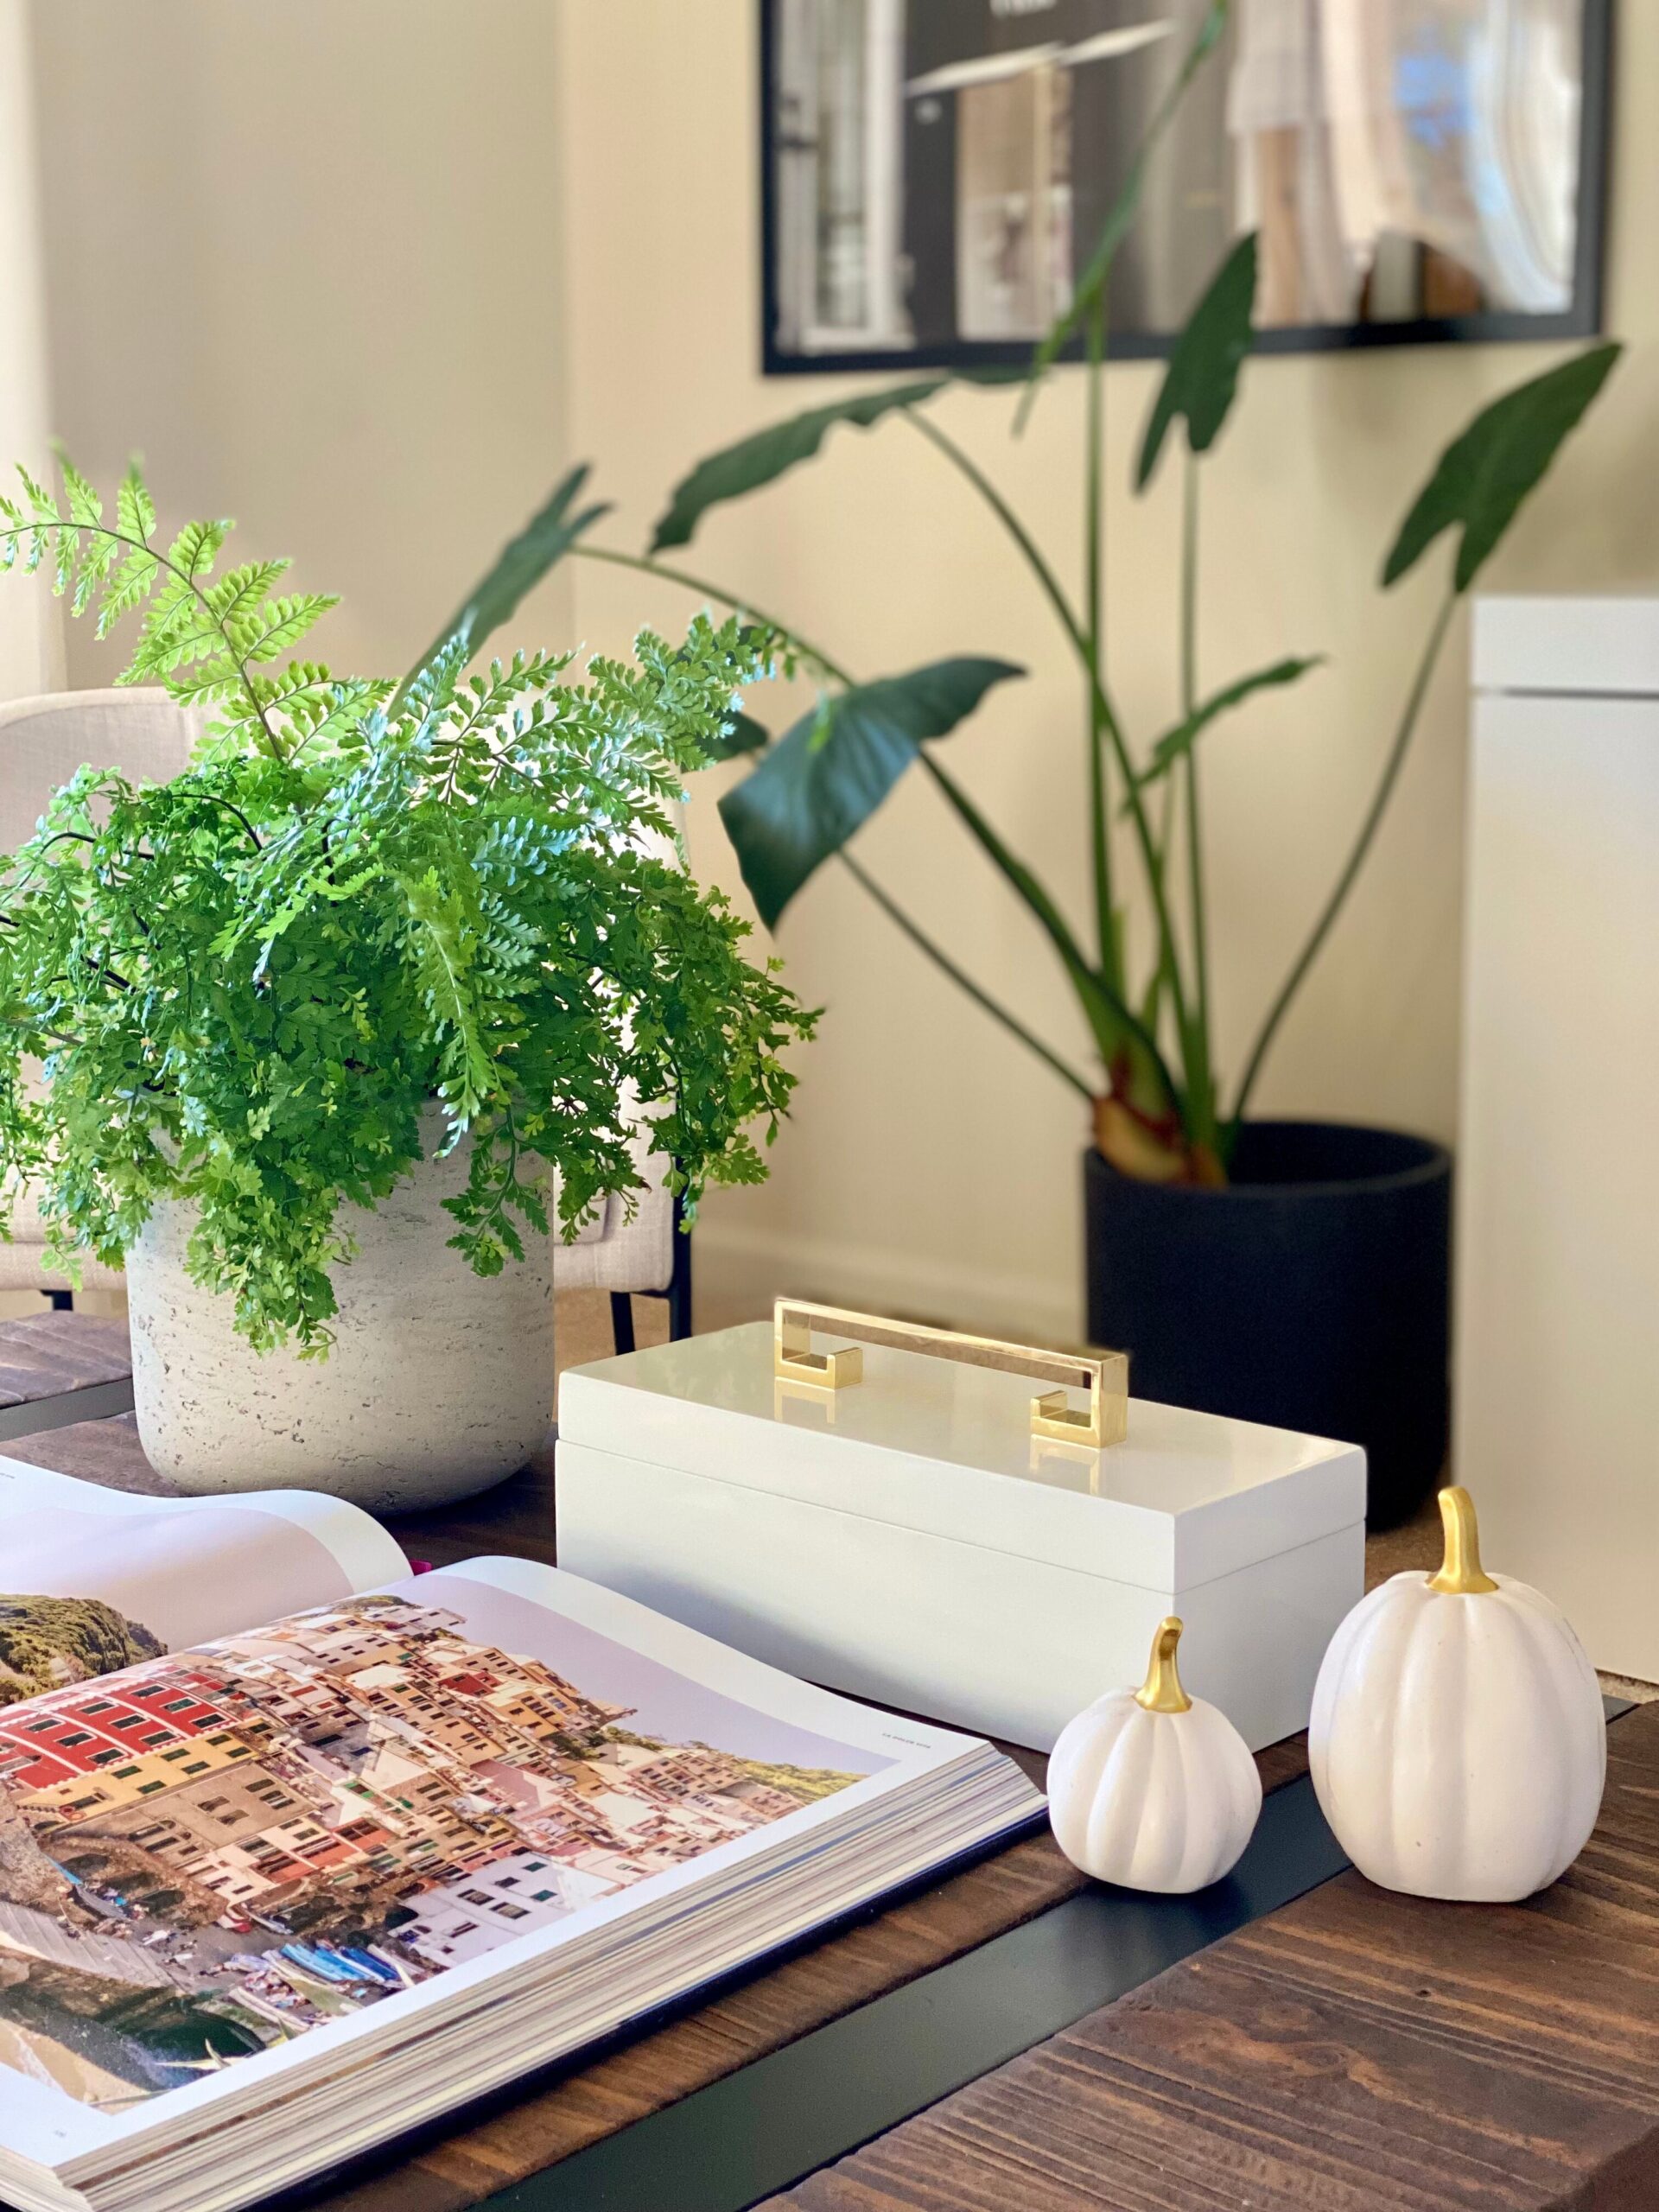 Easy Ways To Refresh Your Home Decor for Fall